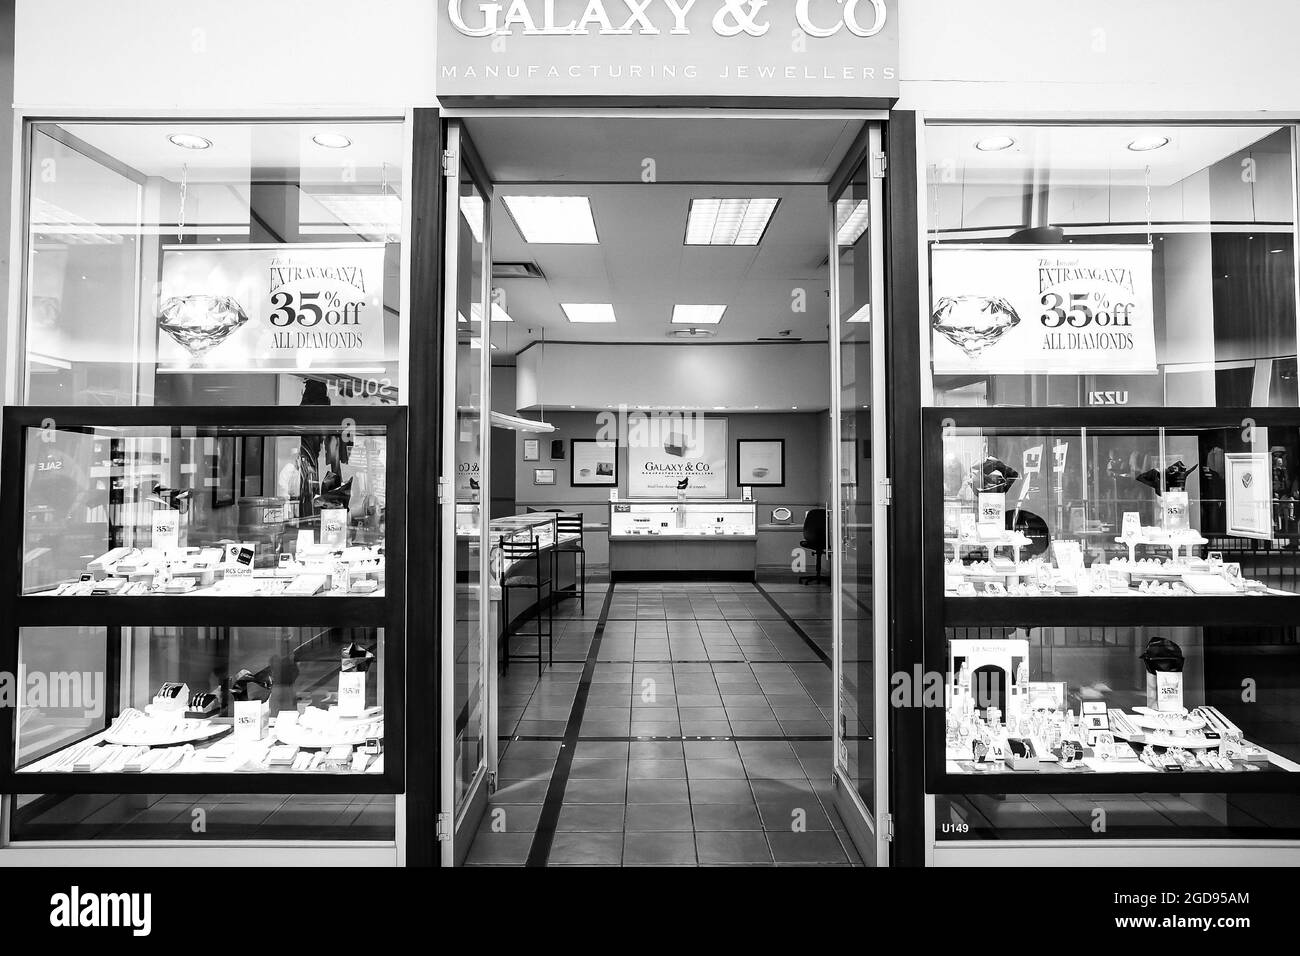 JOHANNESBURG, SOUTH AFRICA - Jan 06, 2021: A grayscale shot inside a diamond jewelry store in Johannesburg, South Africa Stock Photo